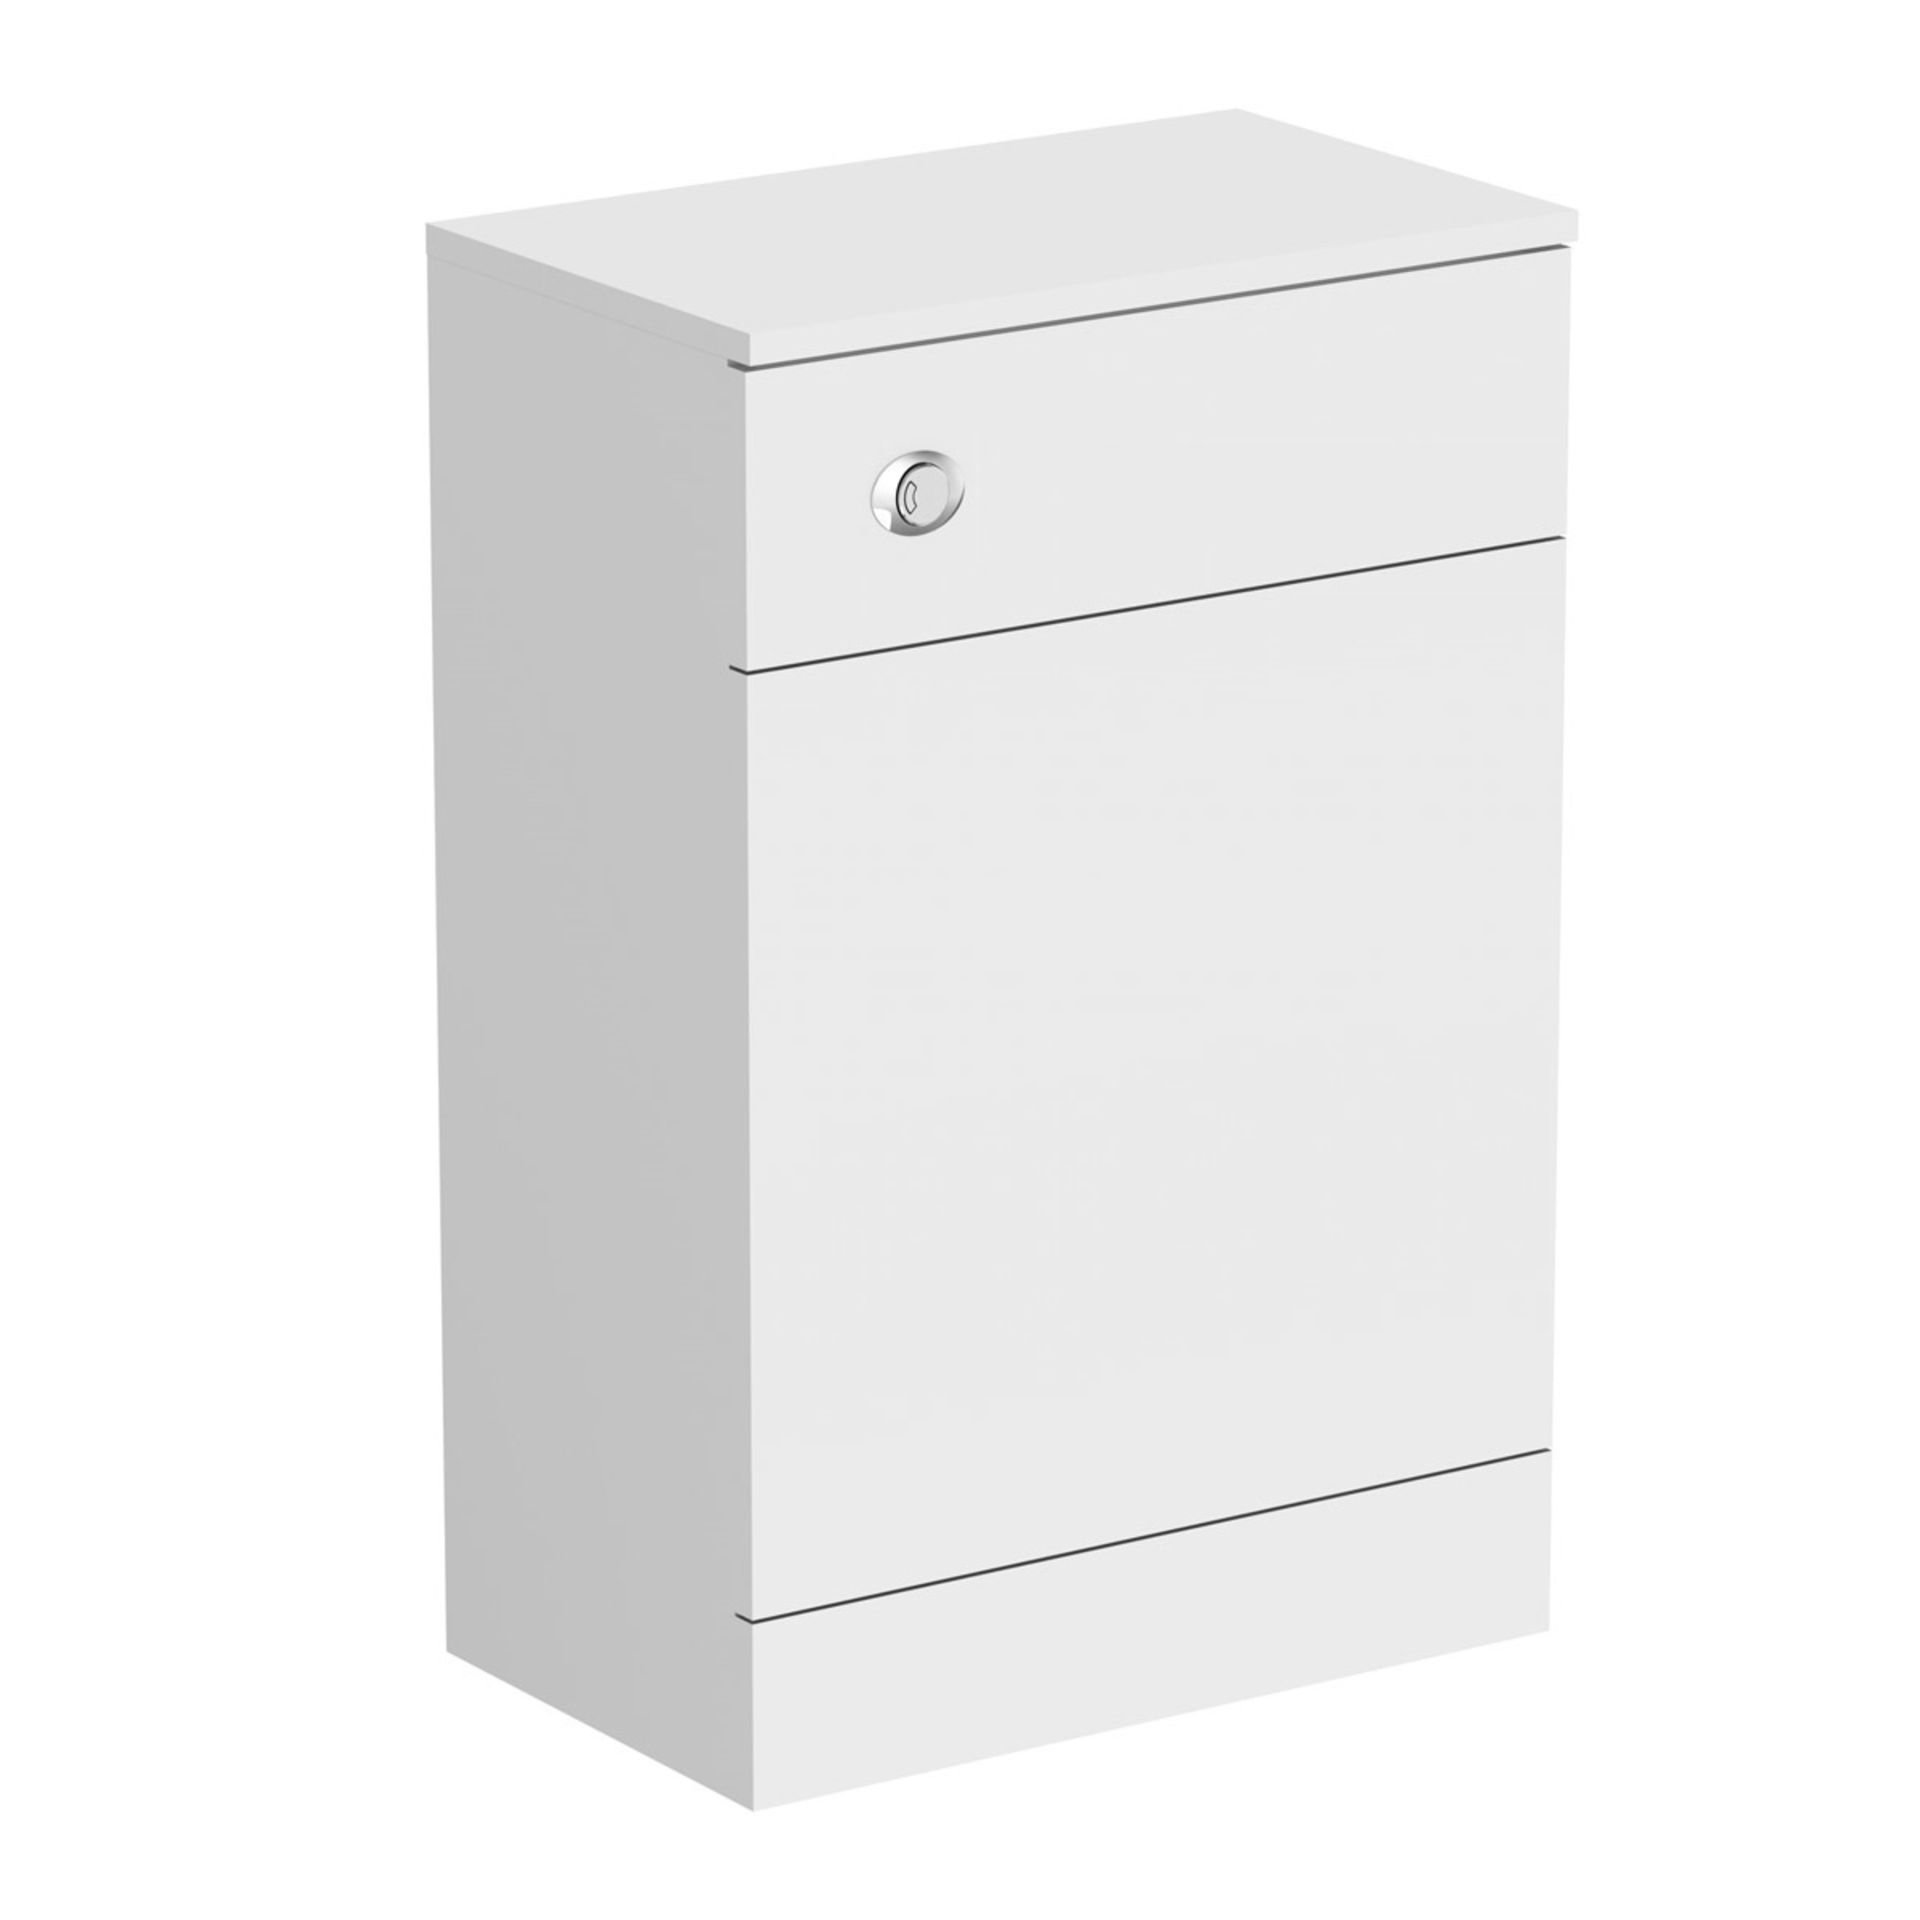 1 x Prague White Back to Wall Toilet Unit - White Finish - 300mm Deep - CL190 - Ref BR099 -